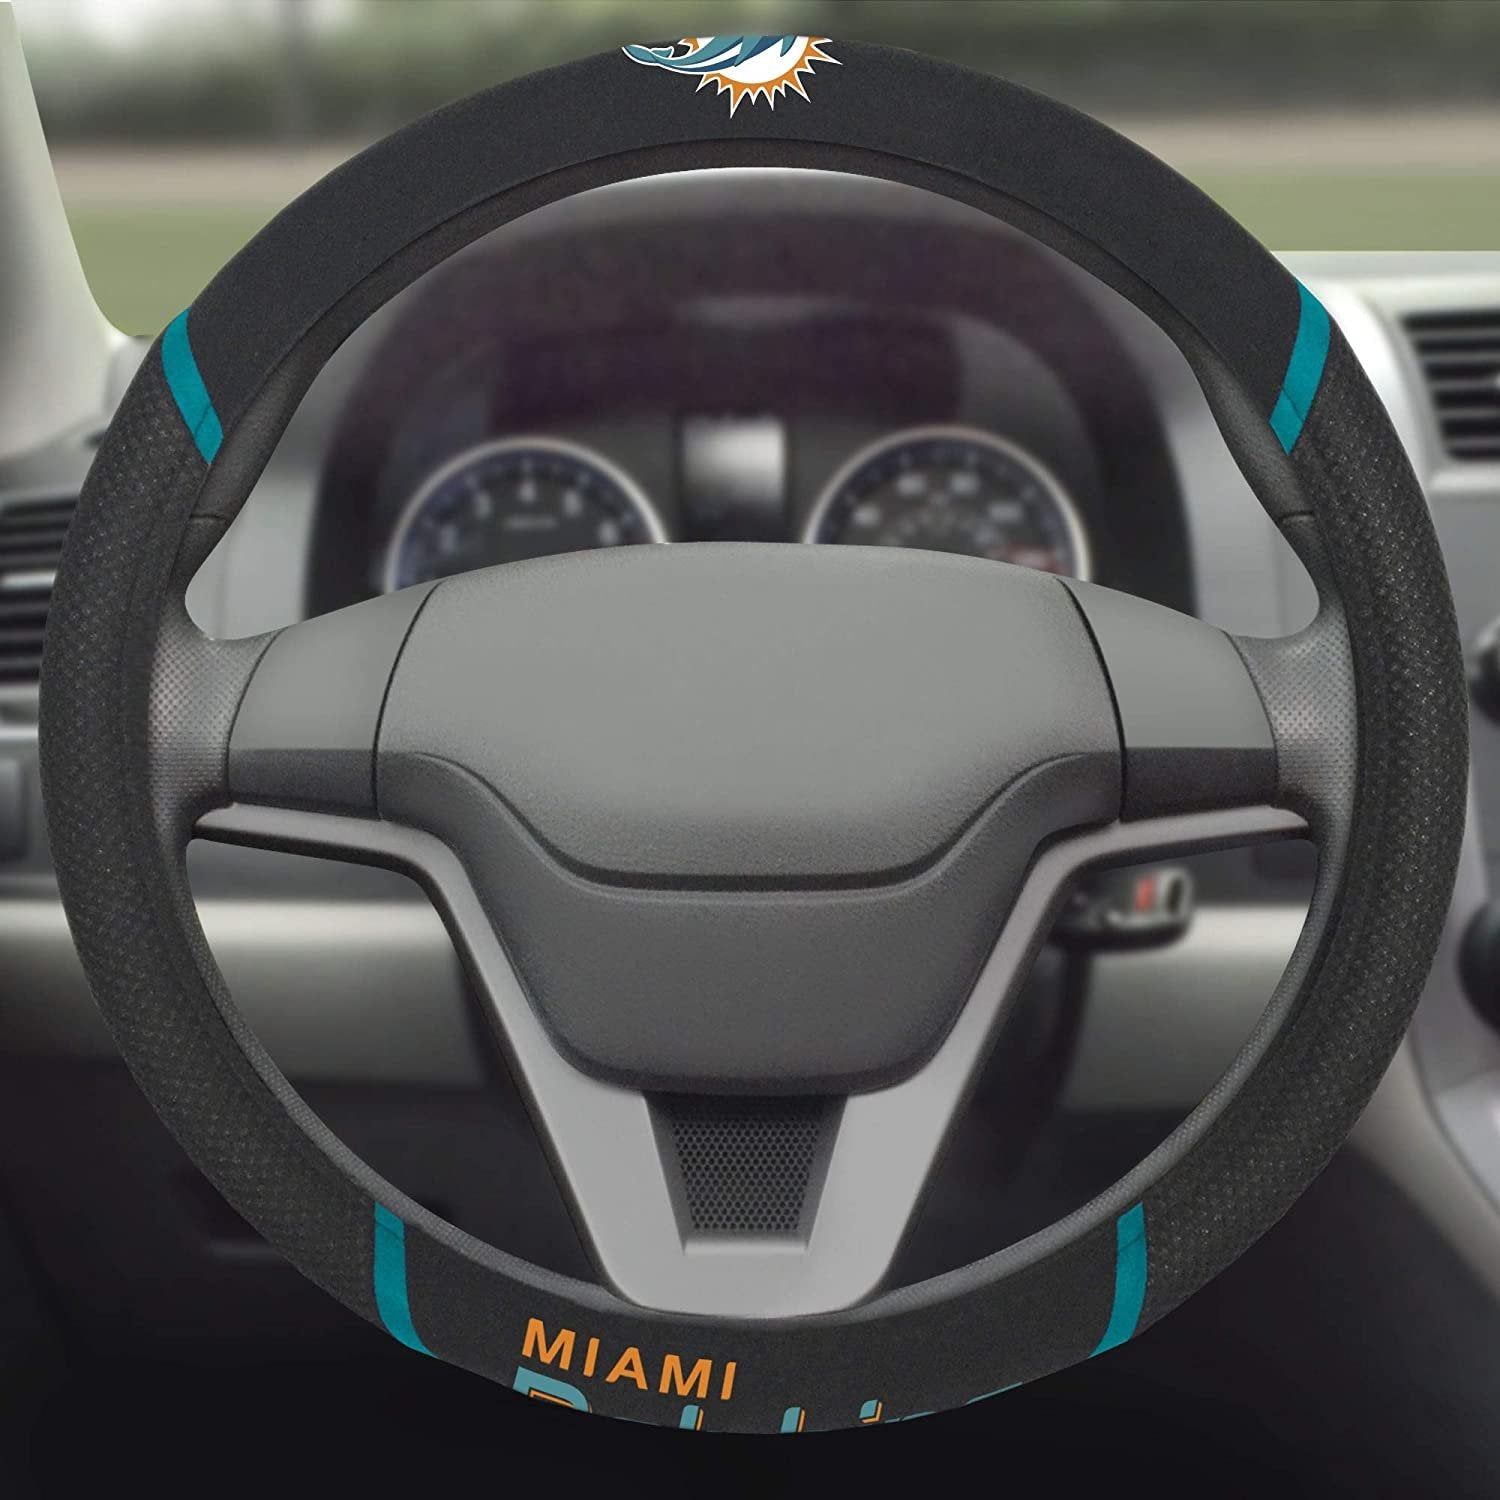 Miami Dolphins Premium 15 Inch Black Emroidered Steering Wheel Cover